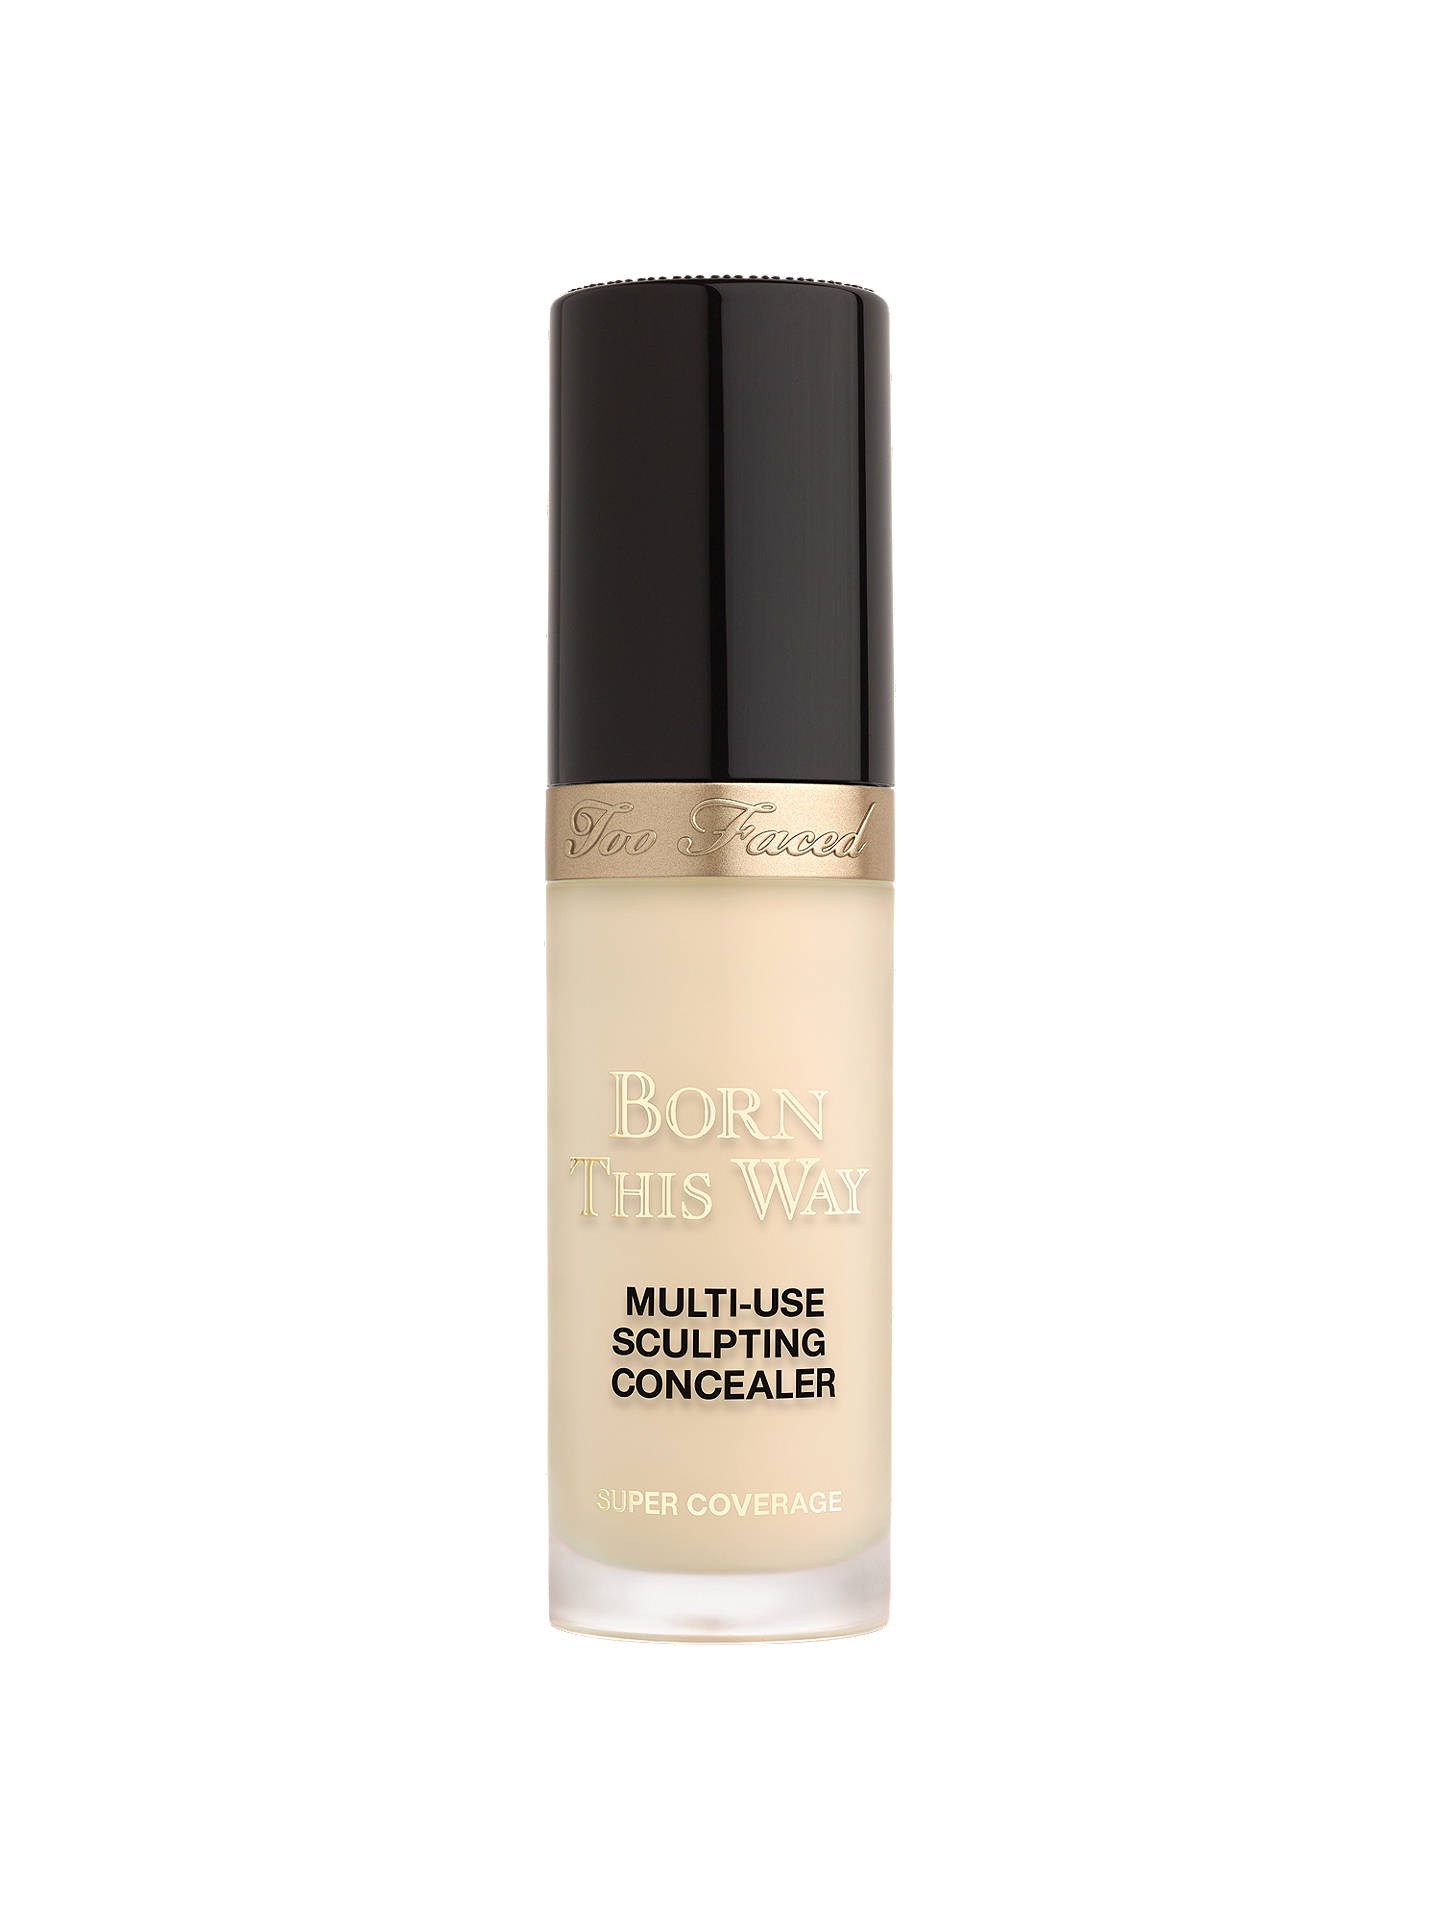 Too Faced Born This Way Super Coverage Multi-Use Sculpting Concealer at - Born This Way Concealer Almond